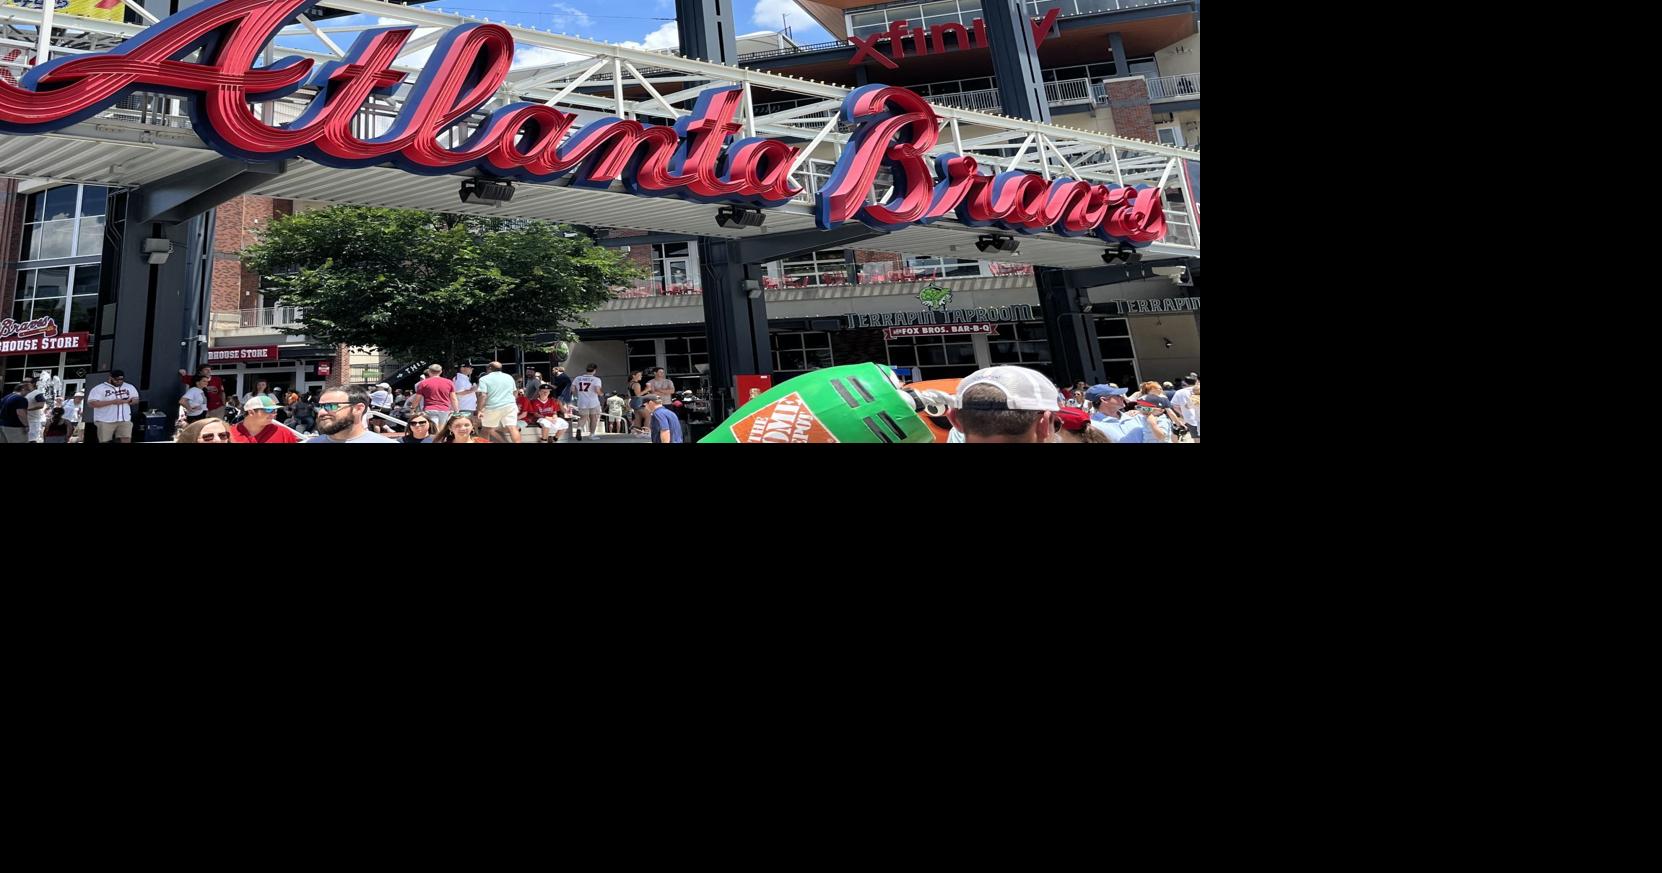 Braves first MLB team to clinch playoff berth this year, rally to